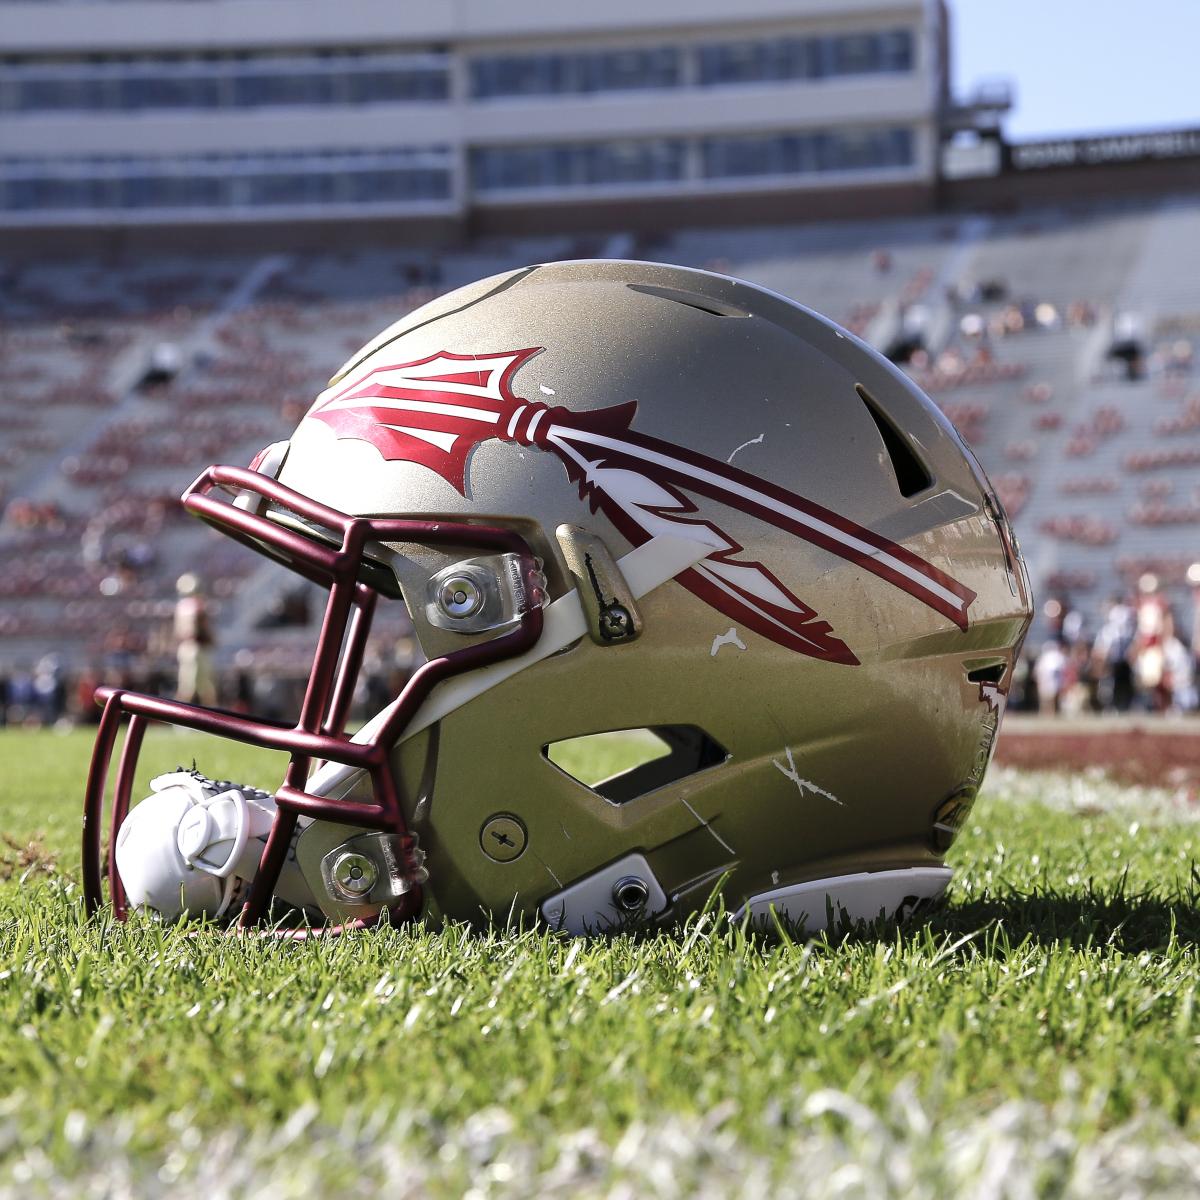 FSU Releases Statement Saying Team Met Bowl Eligibility Requirements